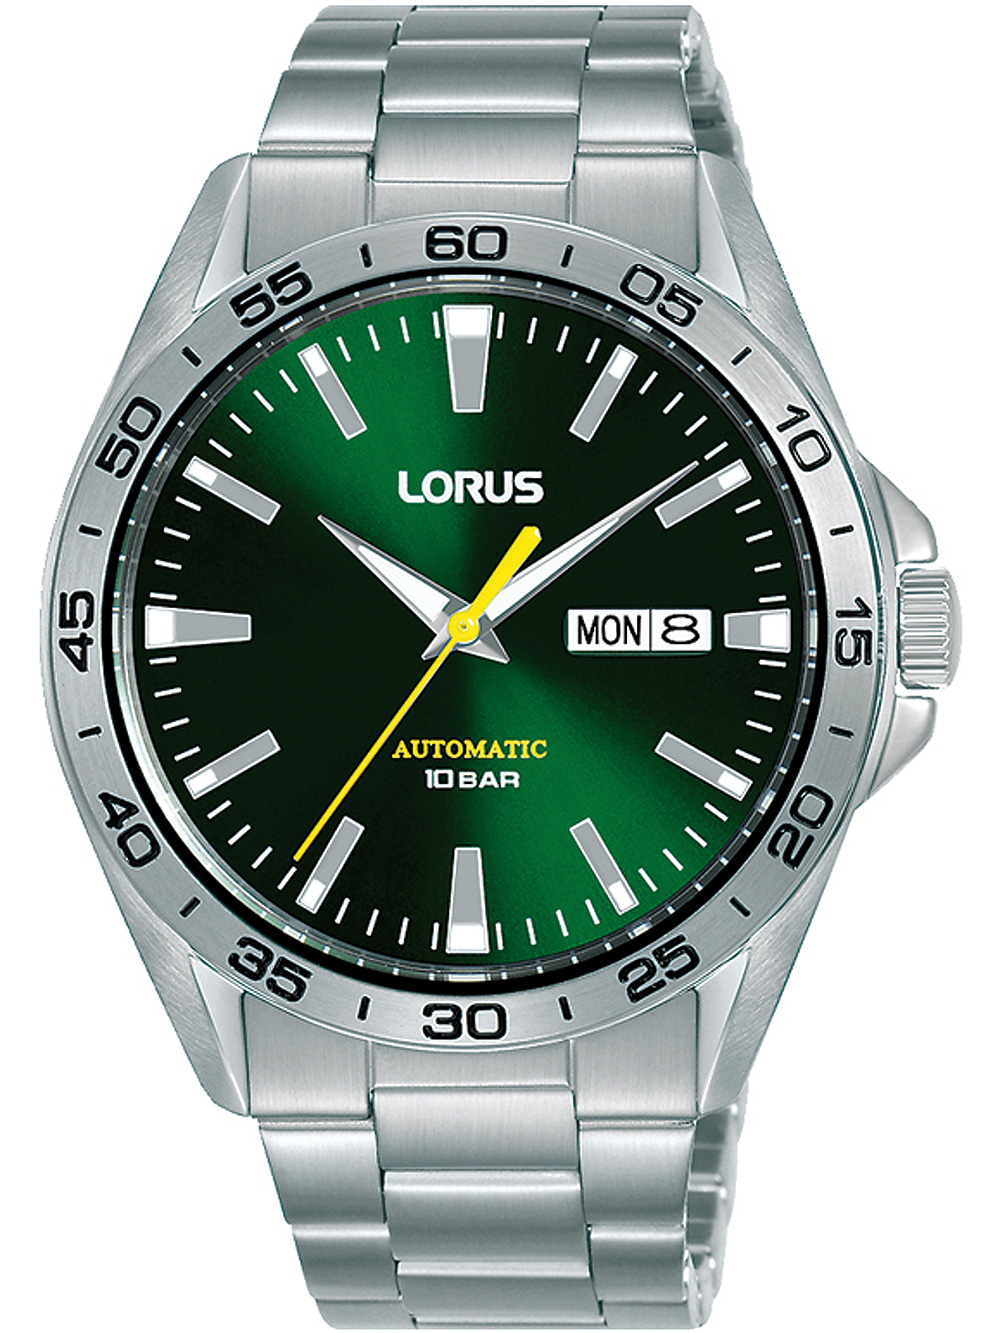 LORUS cheap, secure! watches: postage & free buy